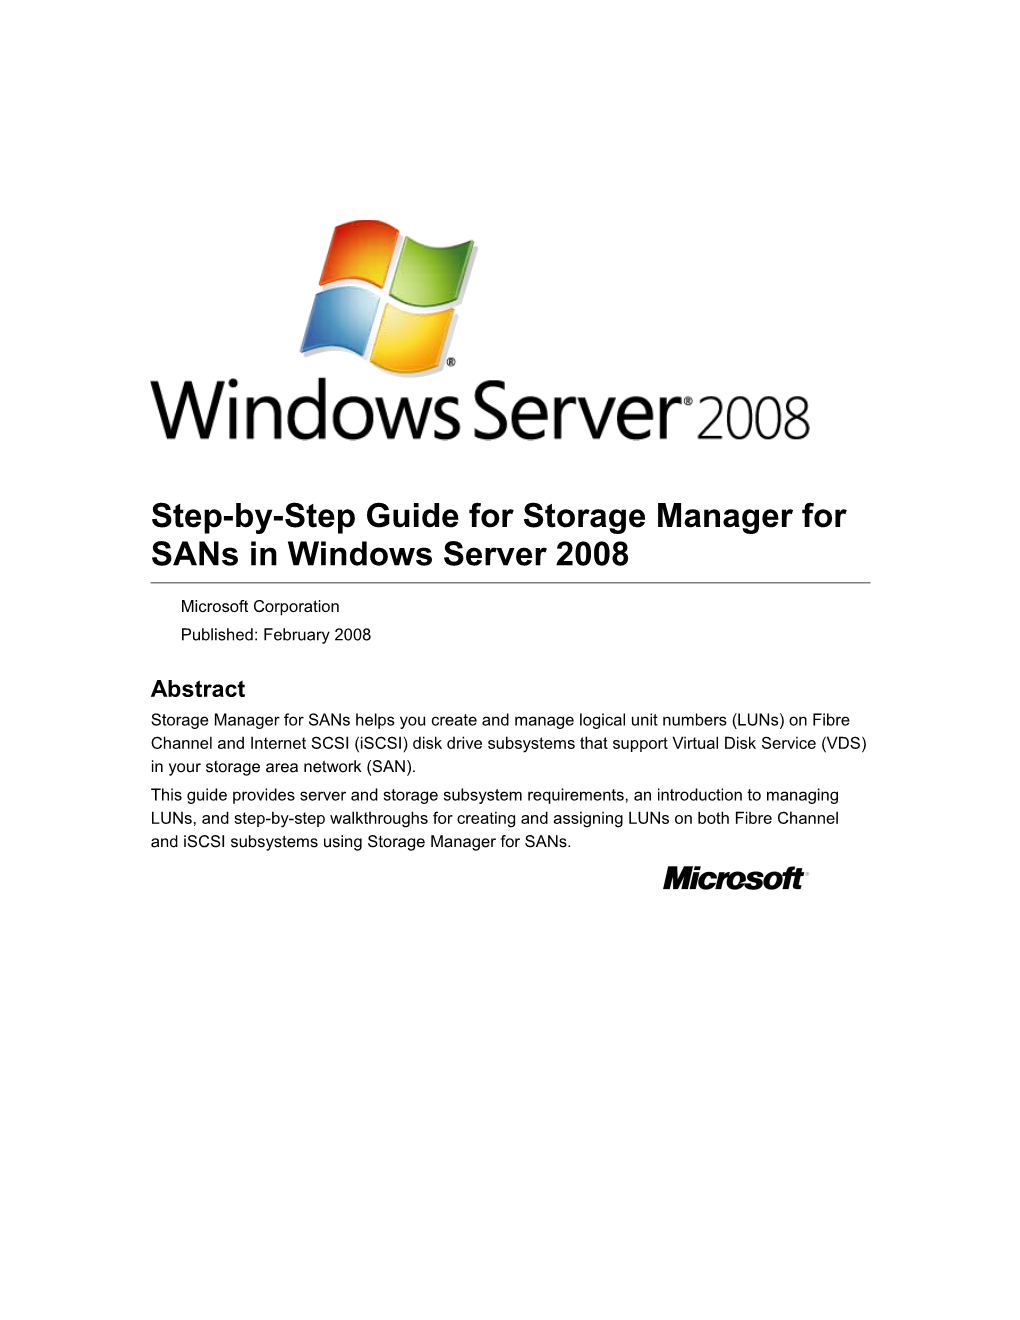 Step-By-Step Guide for Storage Manager for Sans in Windows Server 2008